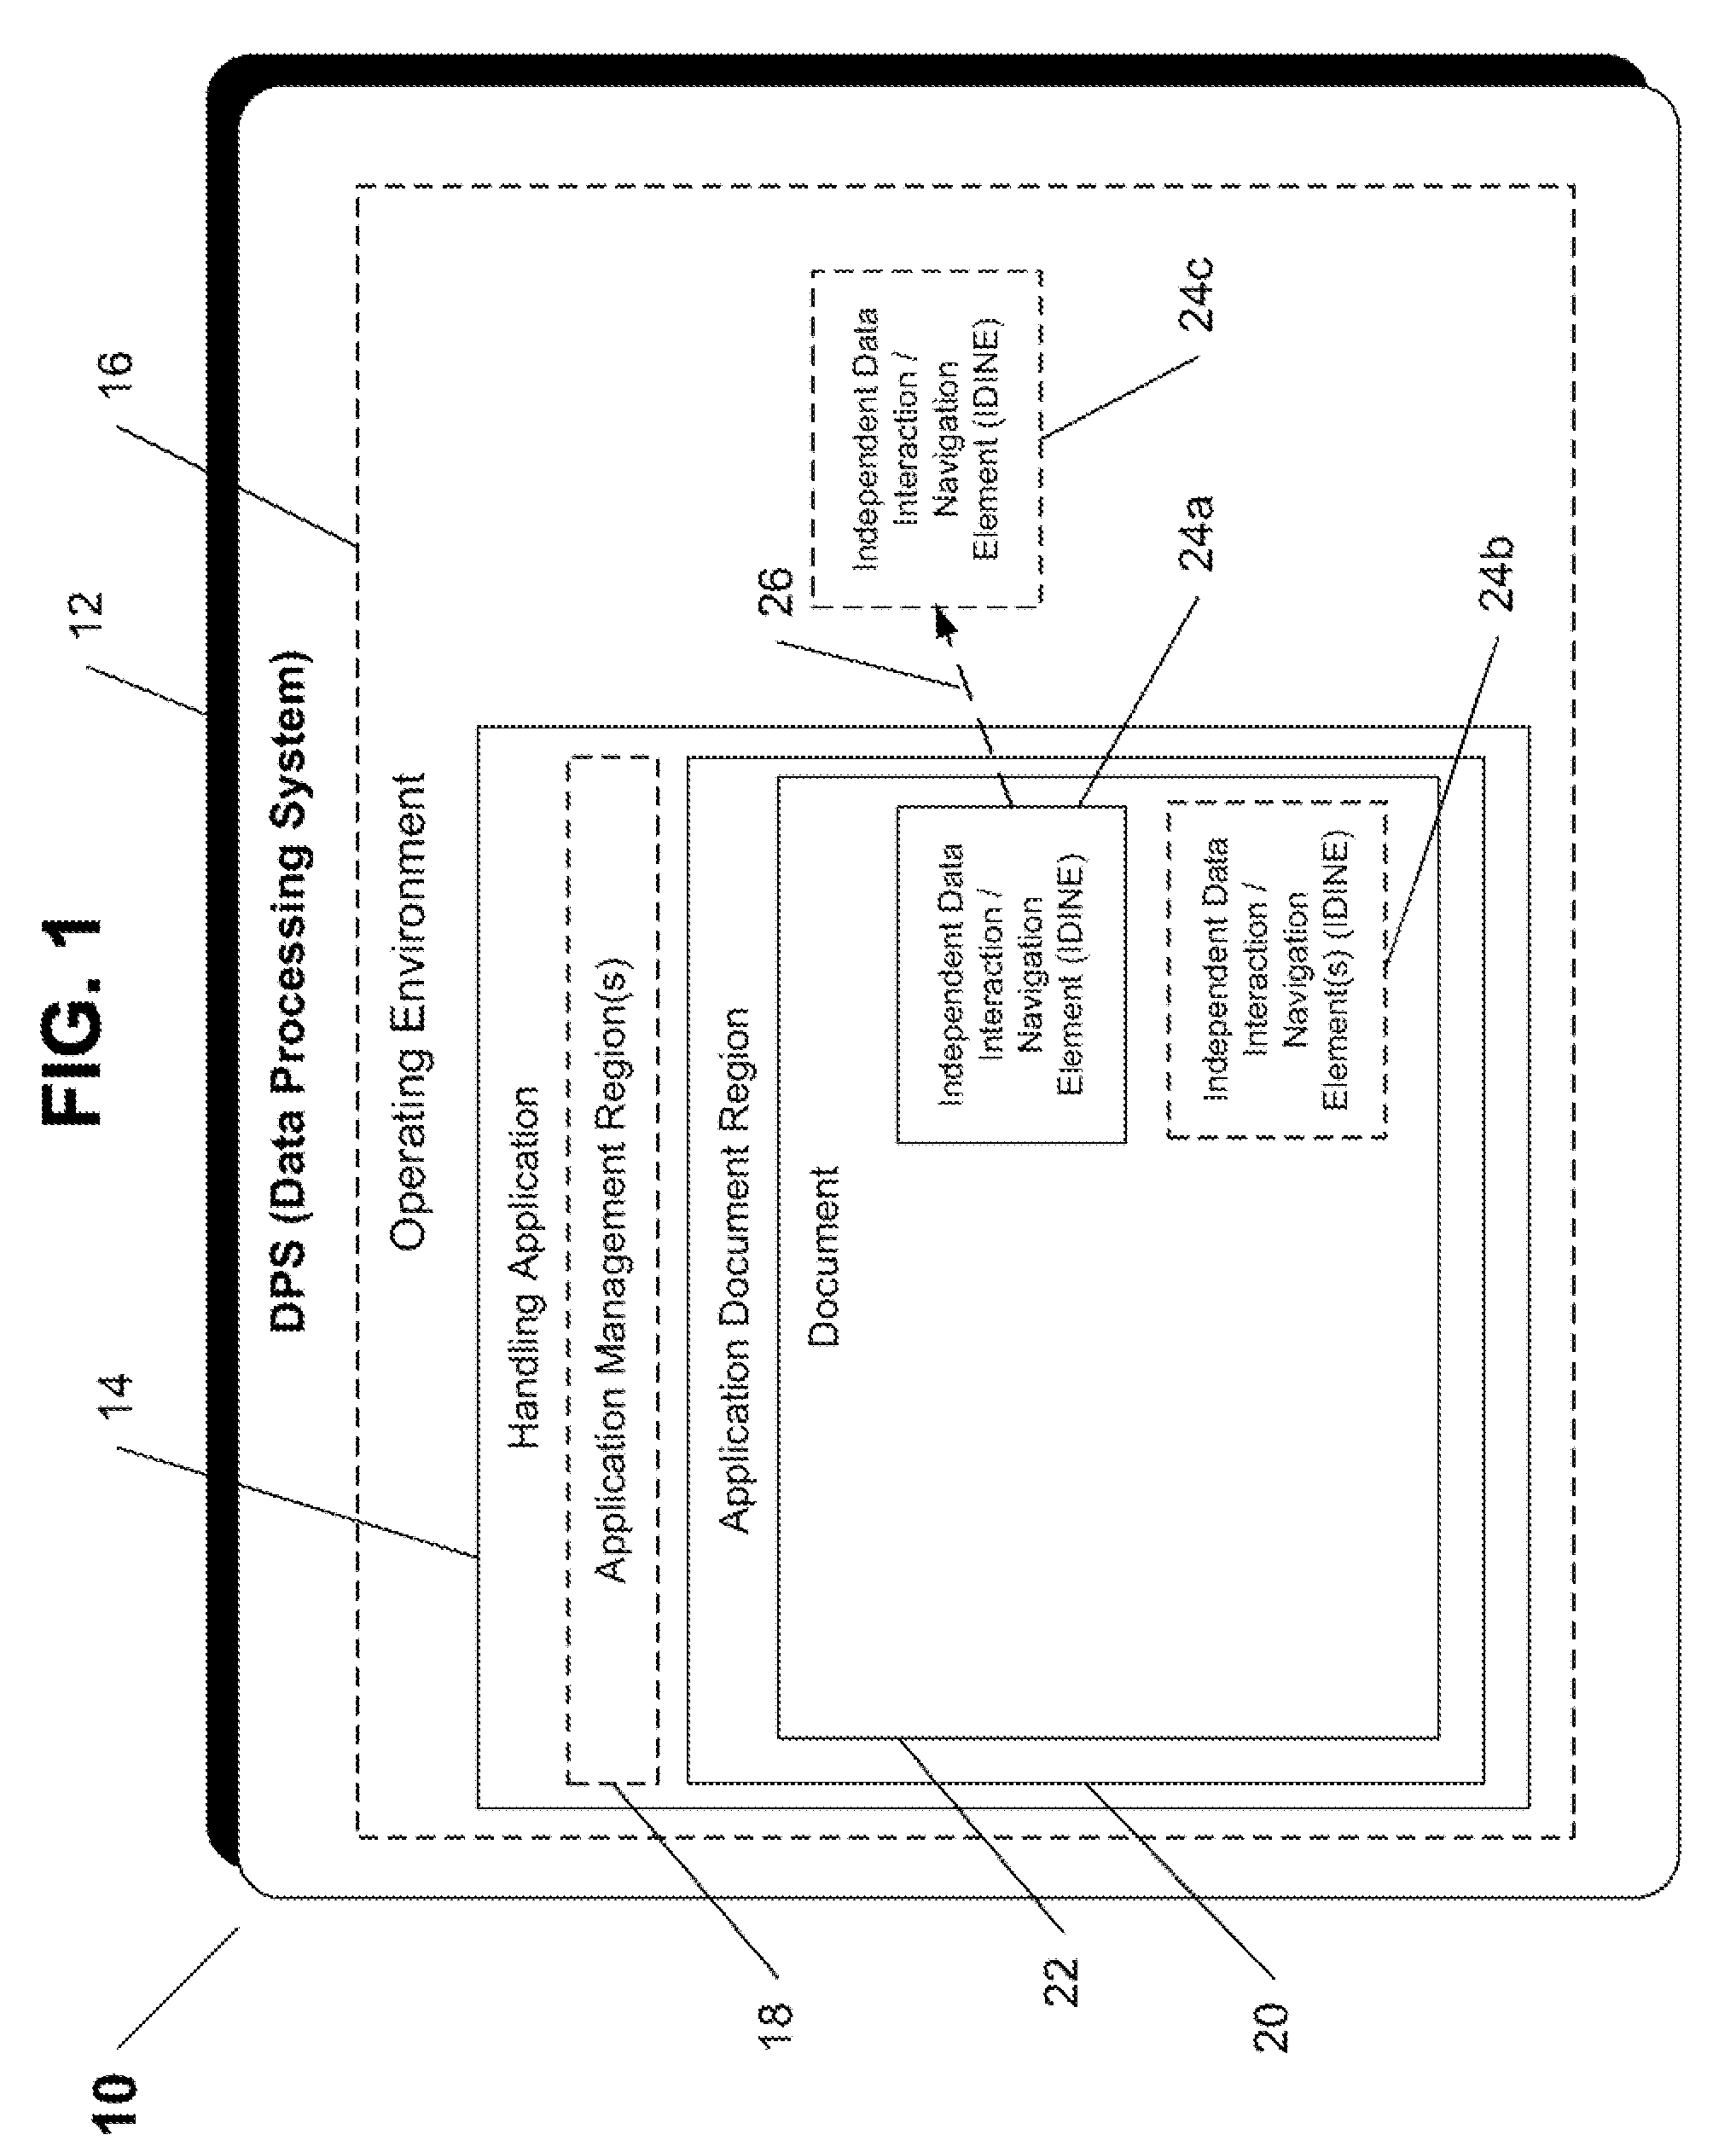 System and method for enabling at least one independent data navigation and interaction activity within a document